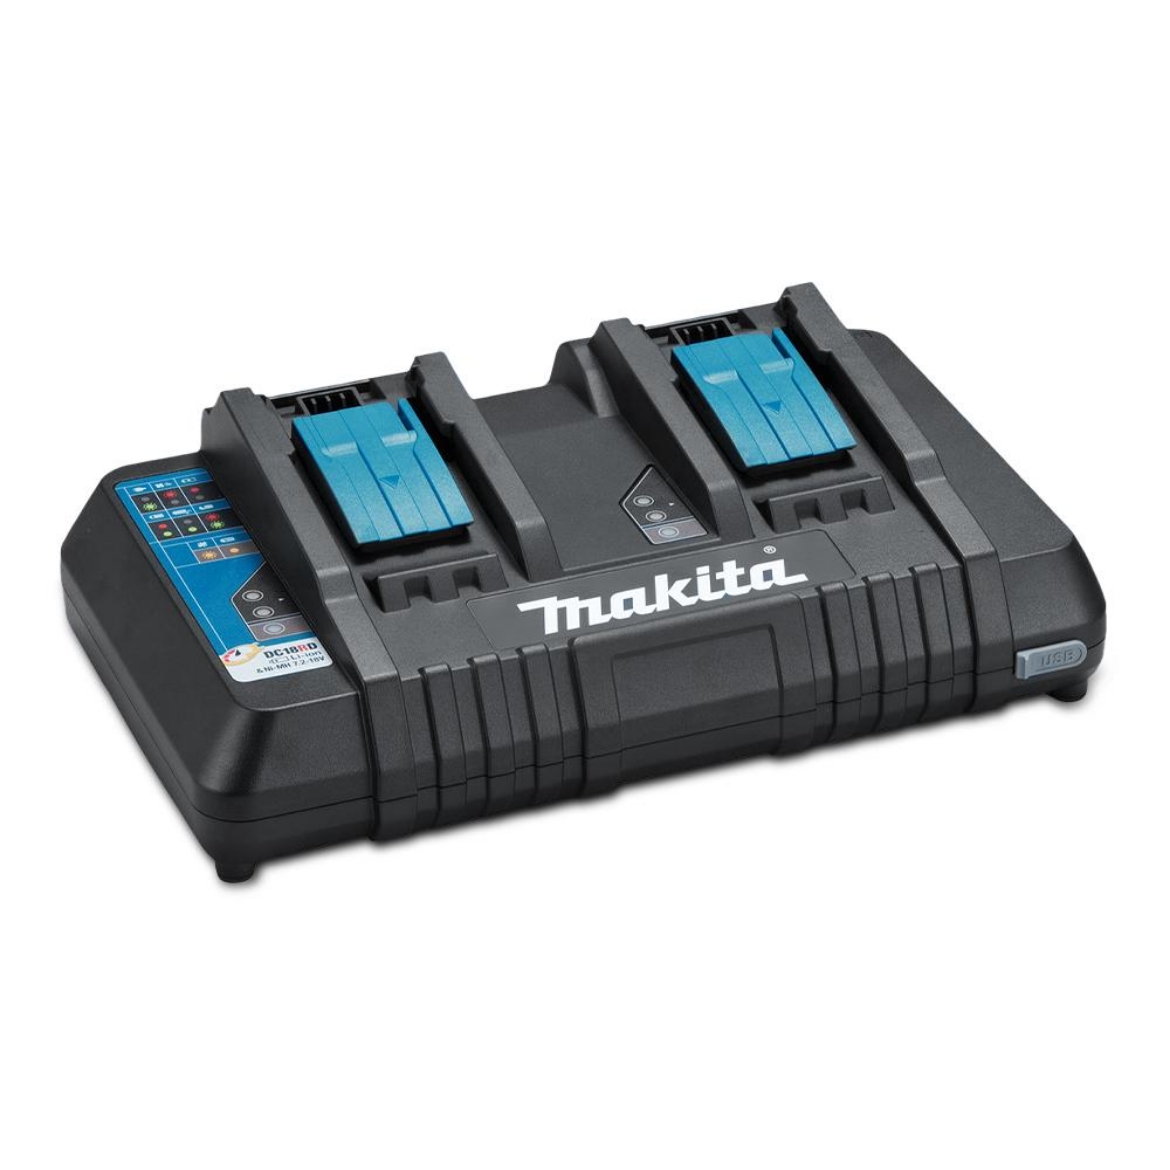 Picture of Makita DC18RD (196936-0) 18V Li-Ion Cordless Battery Same Time Dual Port Charger